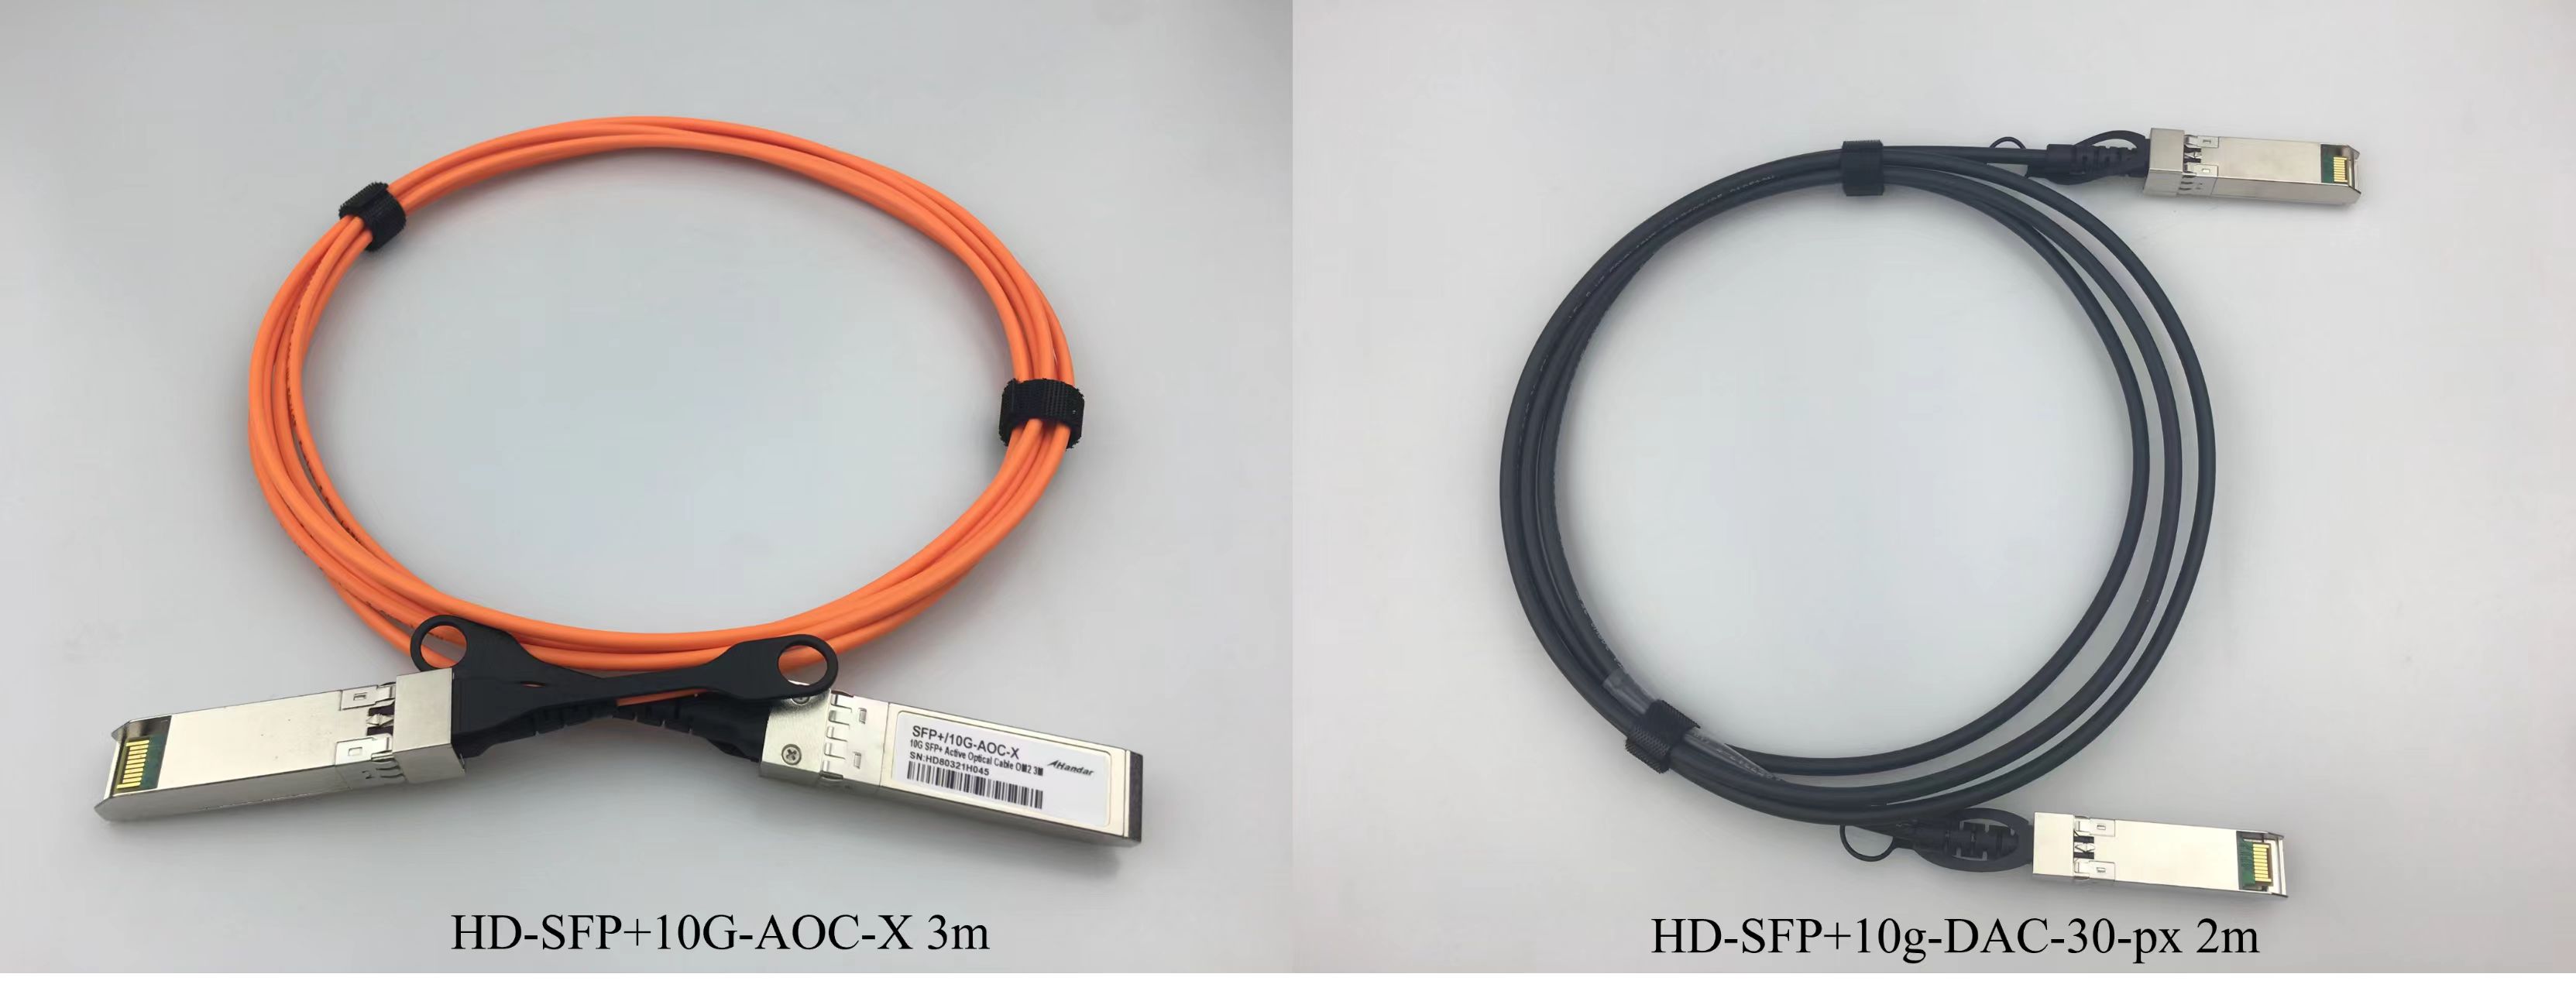 Understanding the Differences between AOC and DAC Cables